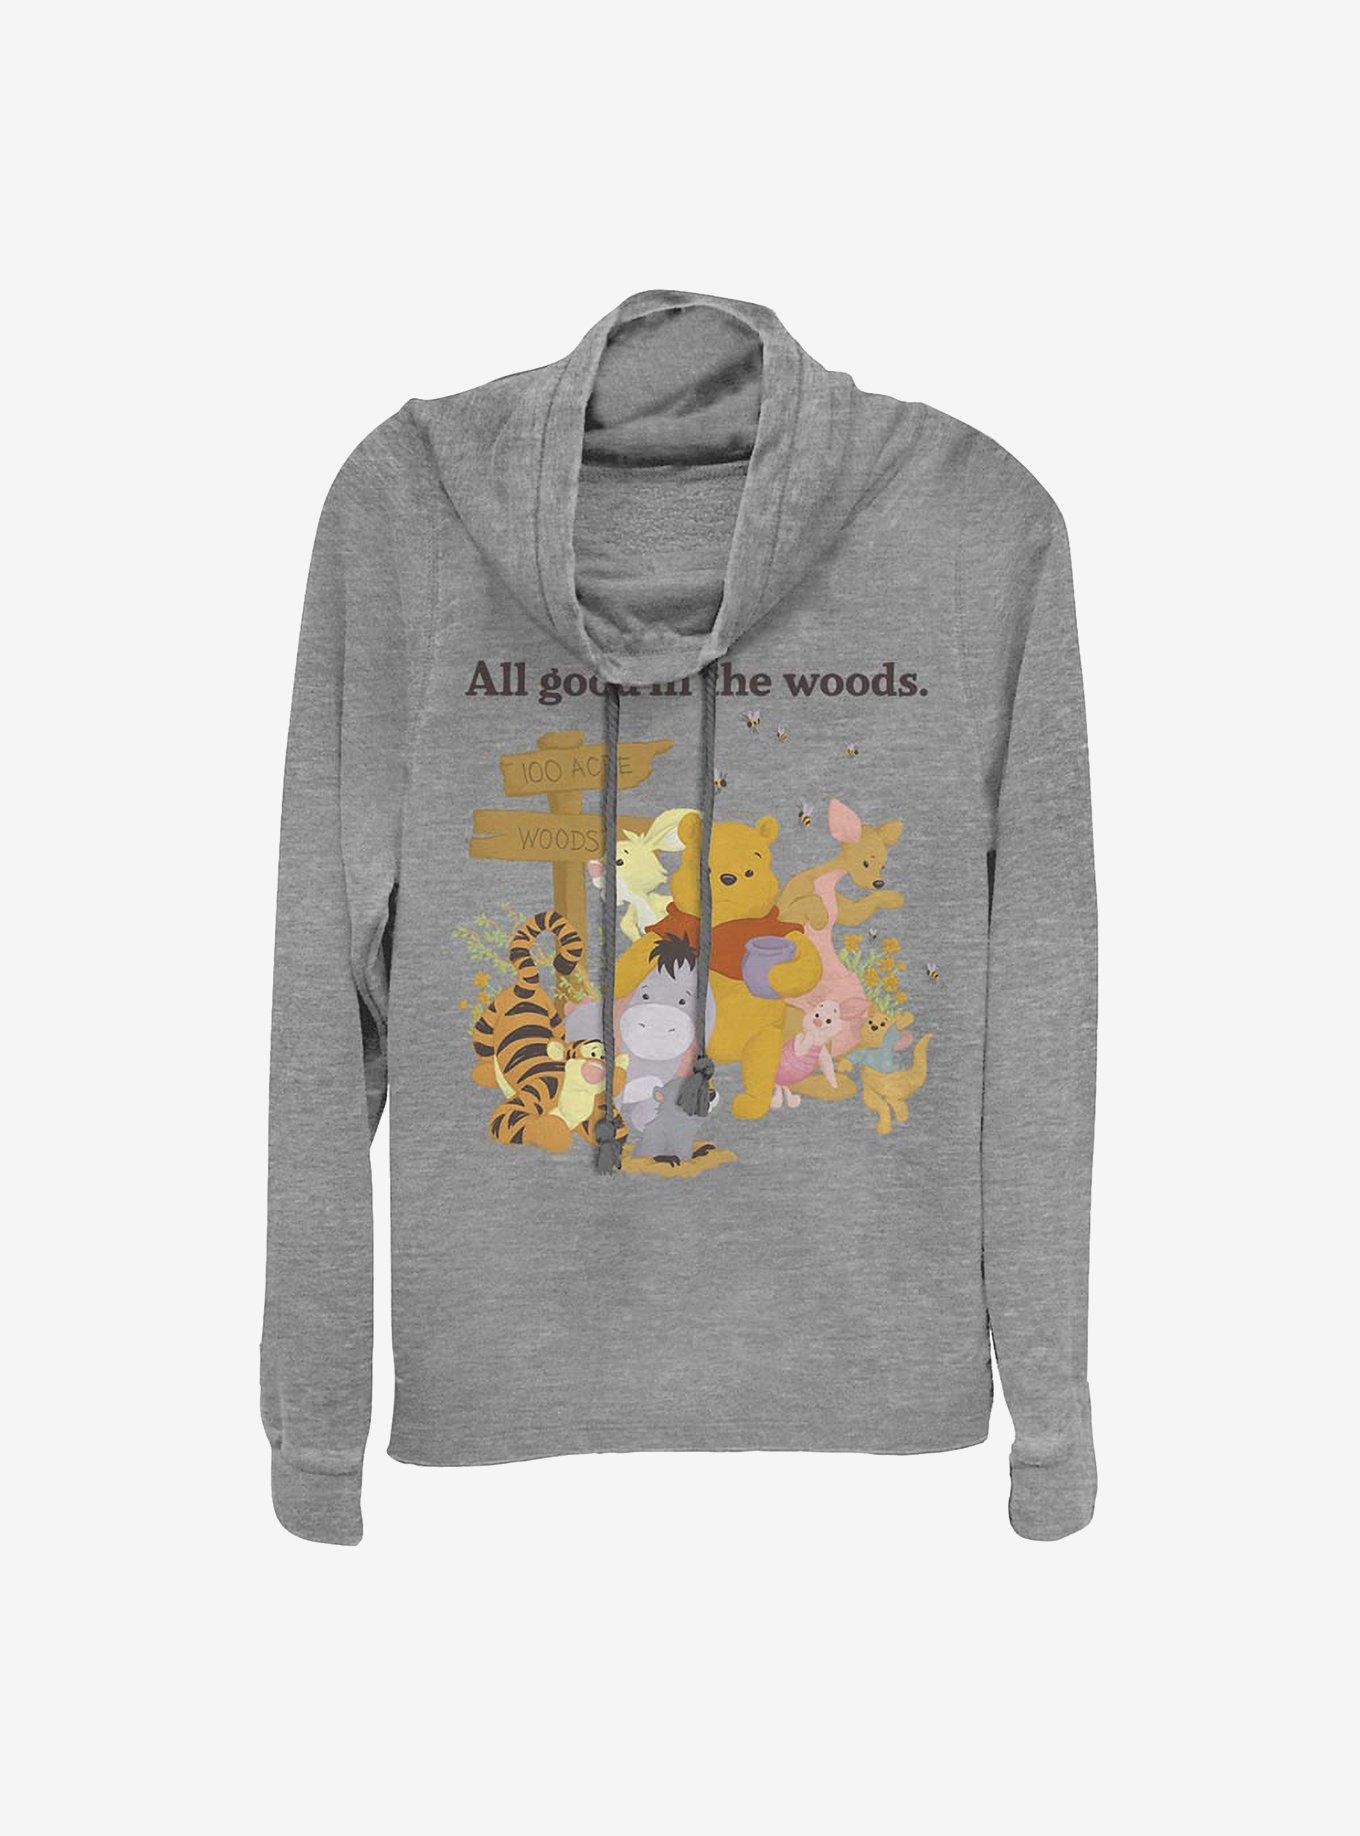 Disney Winnie The Pooh In The Woods Cowlneck Long-Sleeve Girls Top, GRAY HTR, hi-res